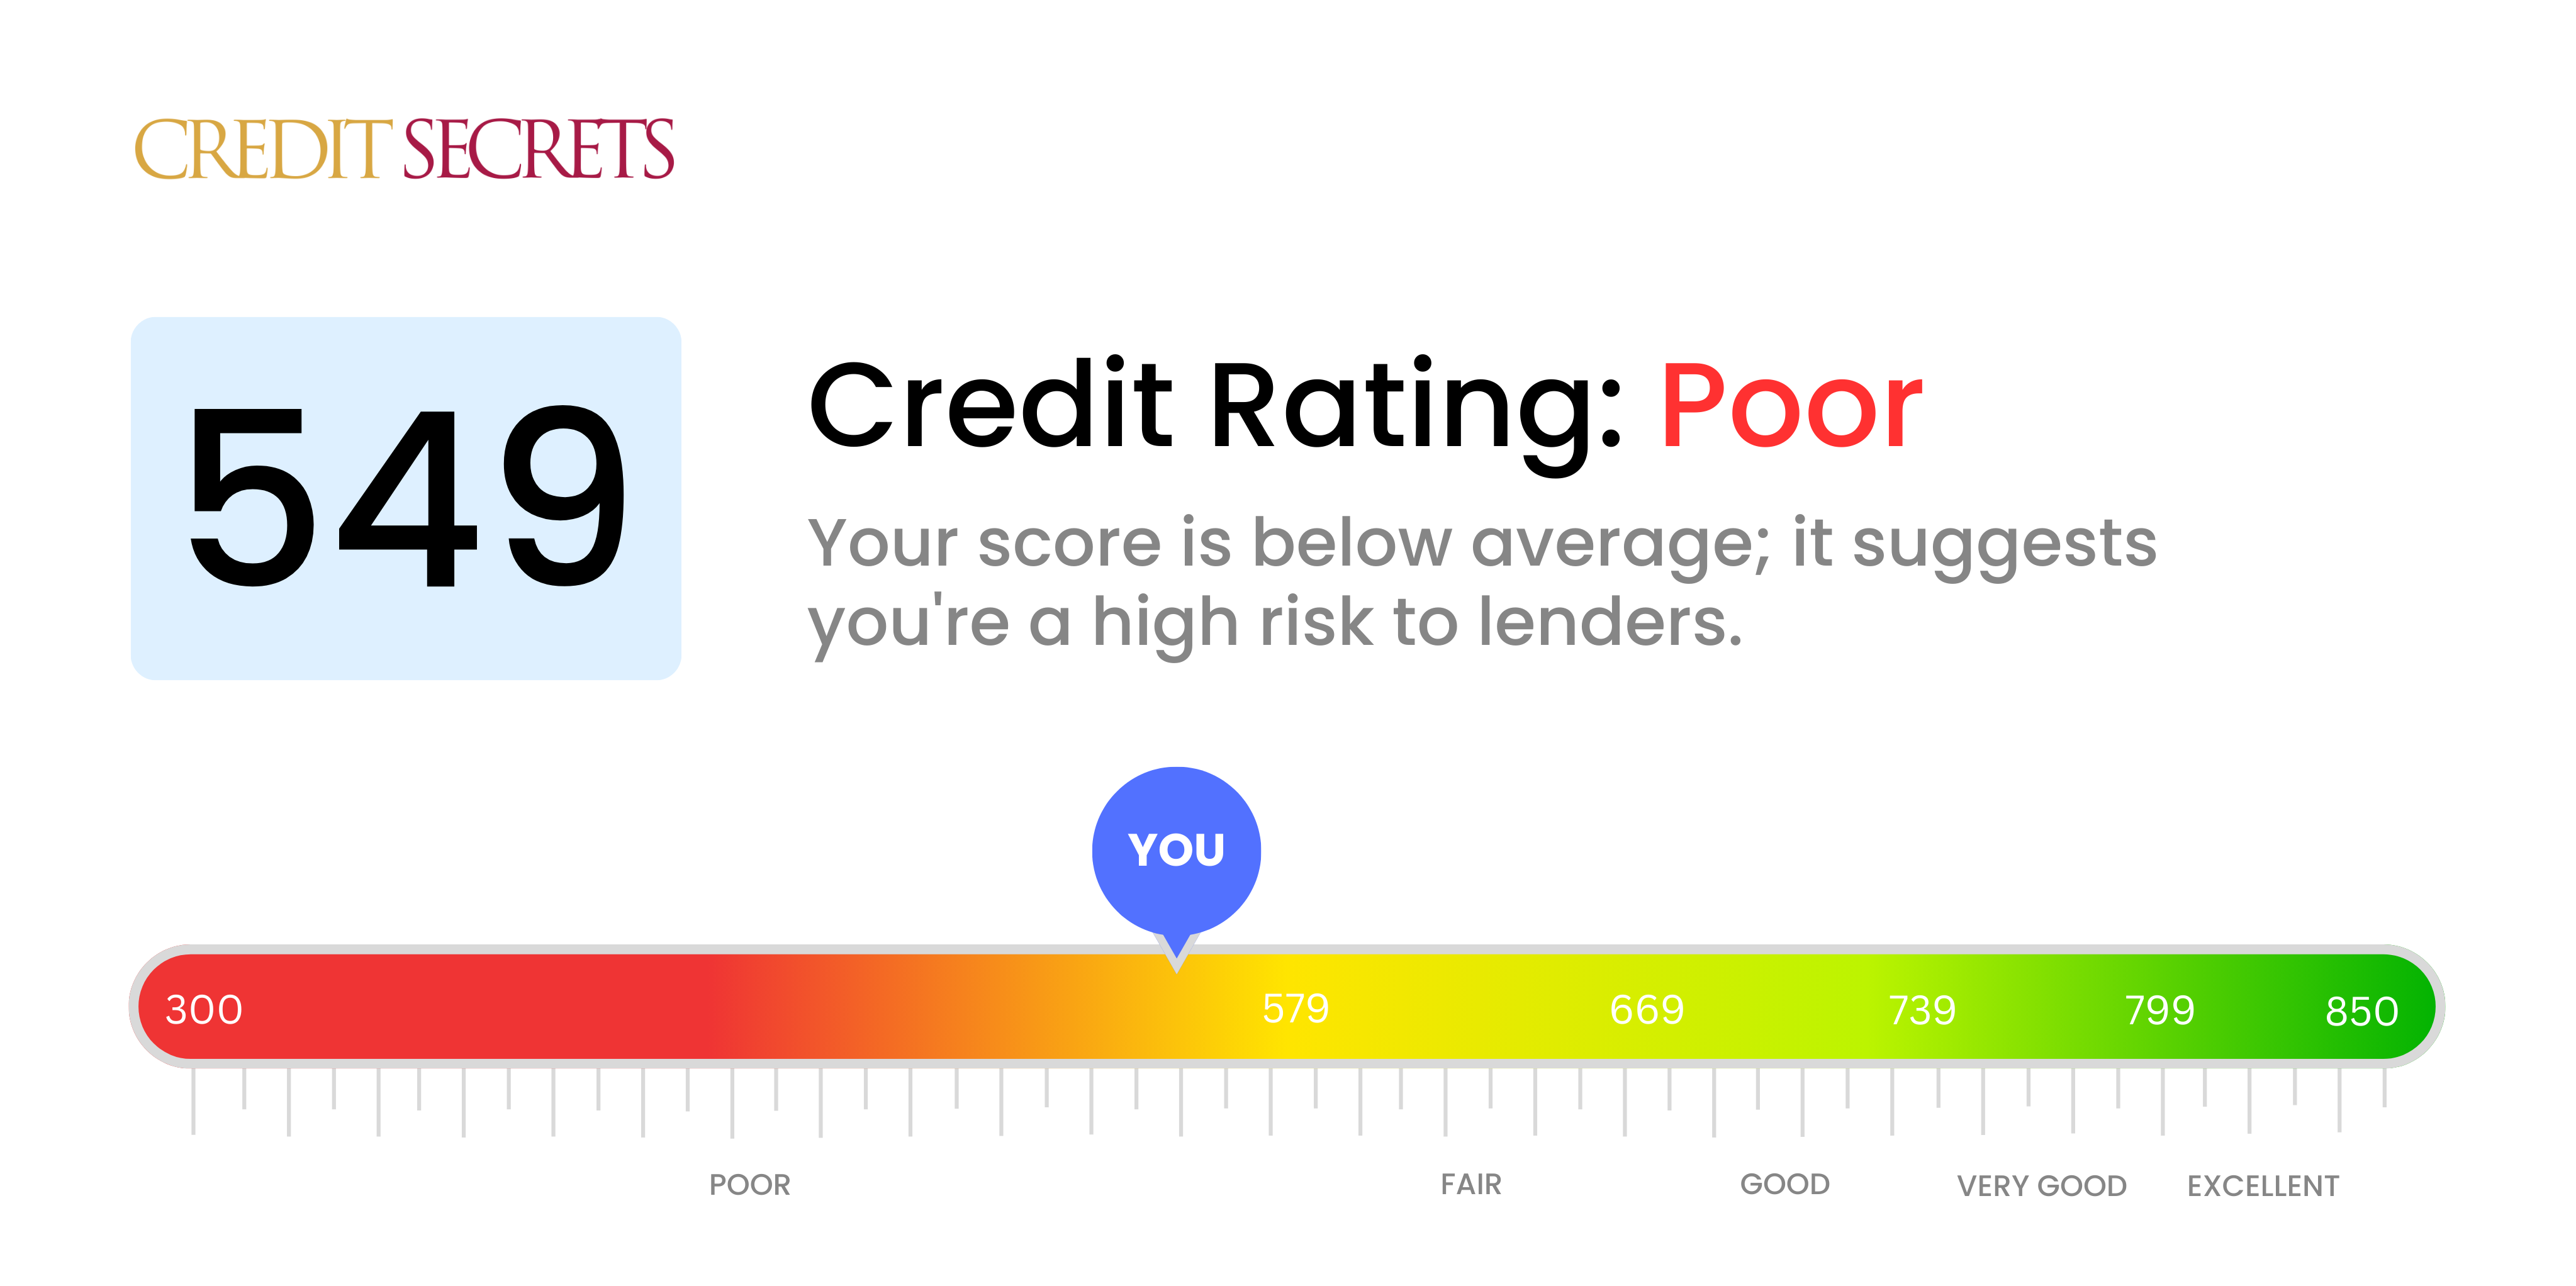 Is 549 a good credit score?